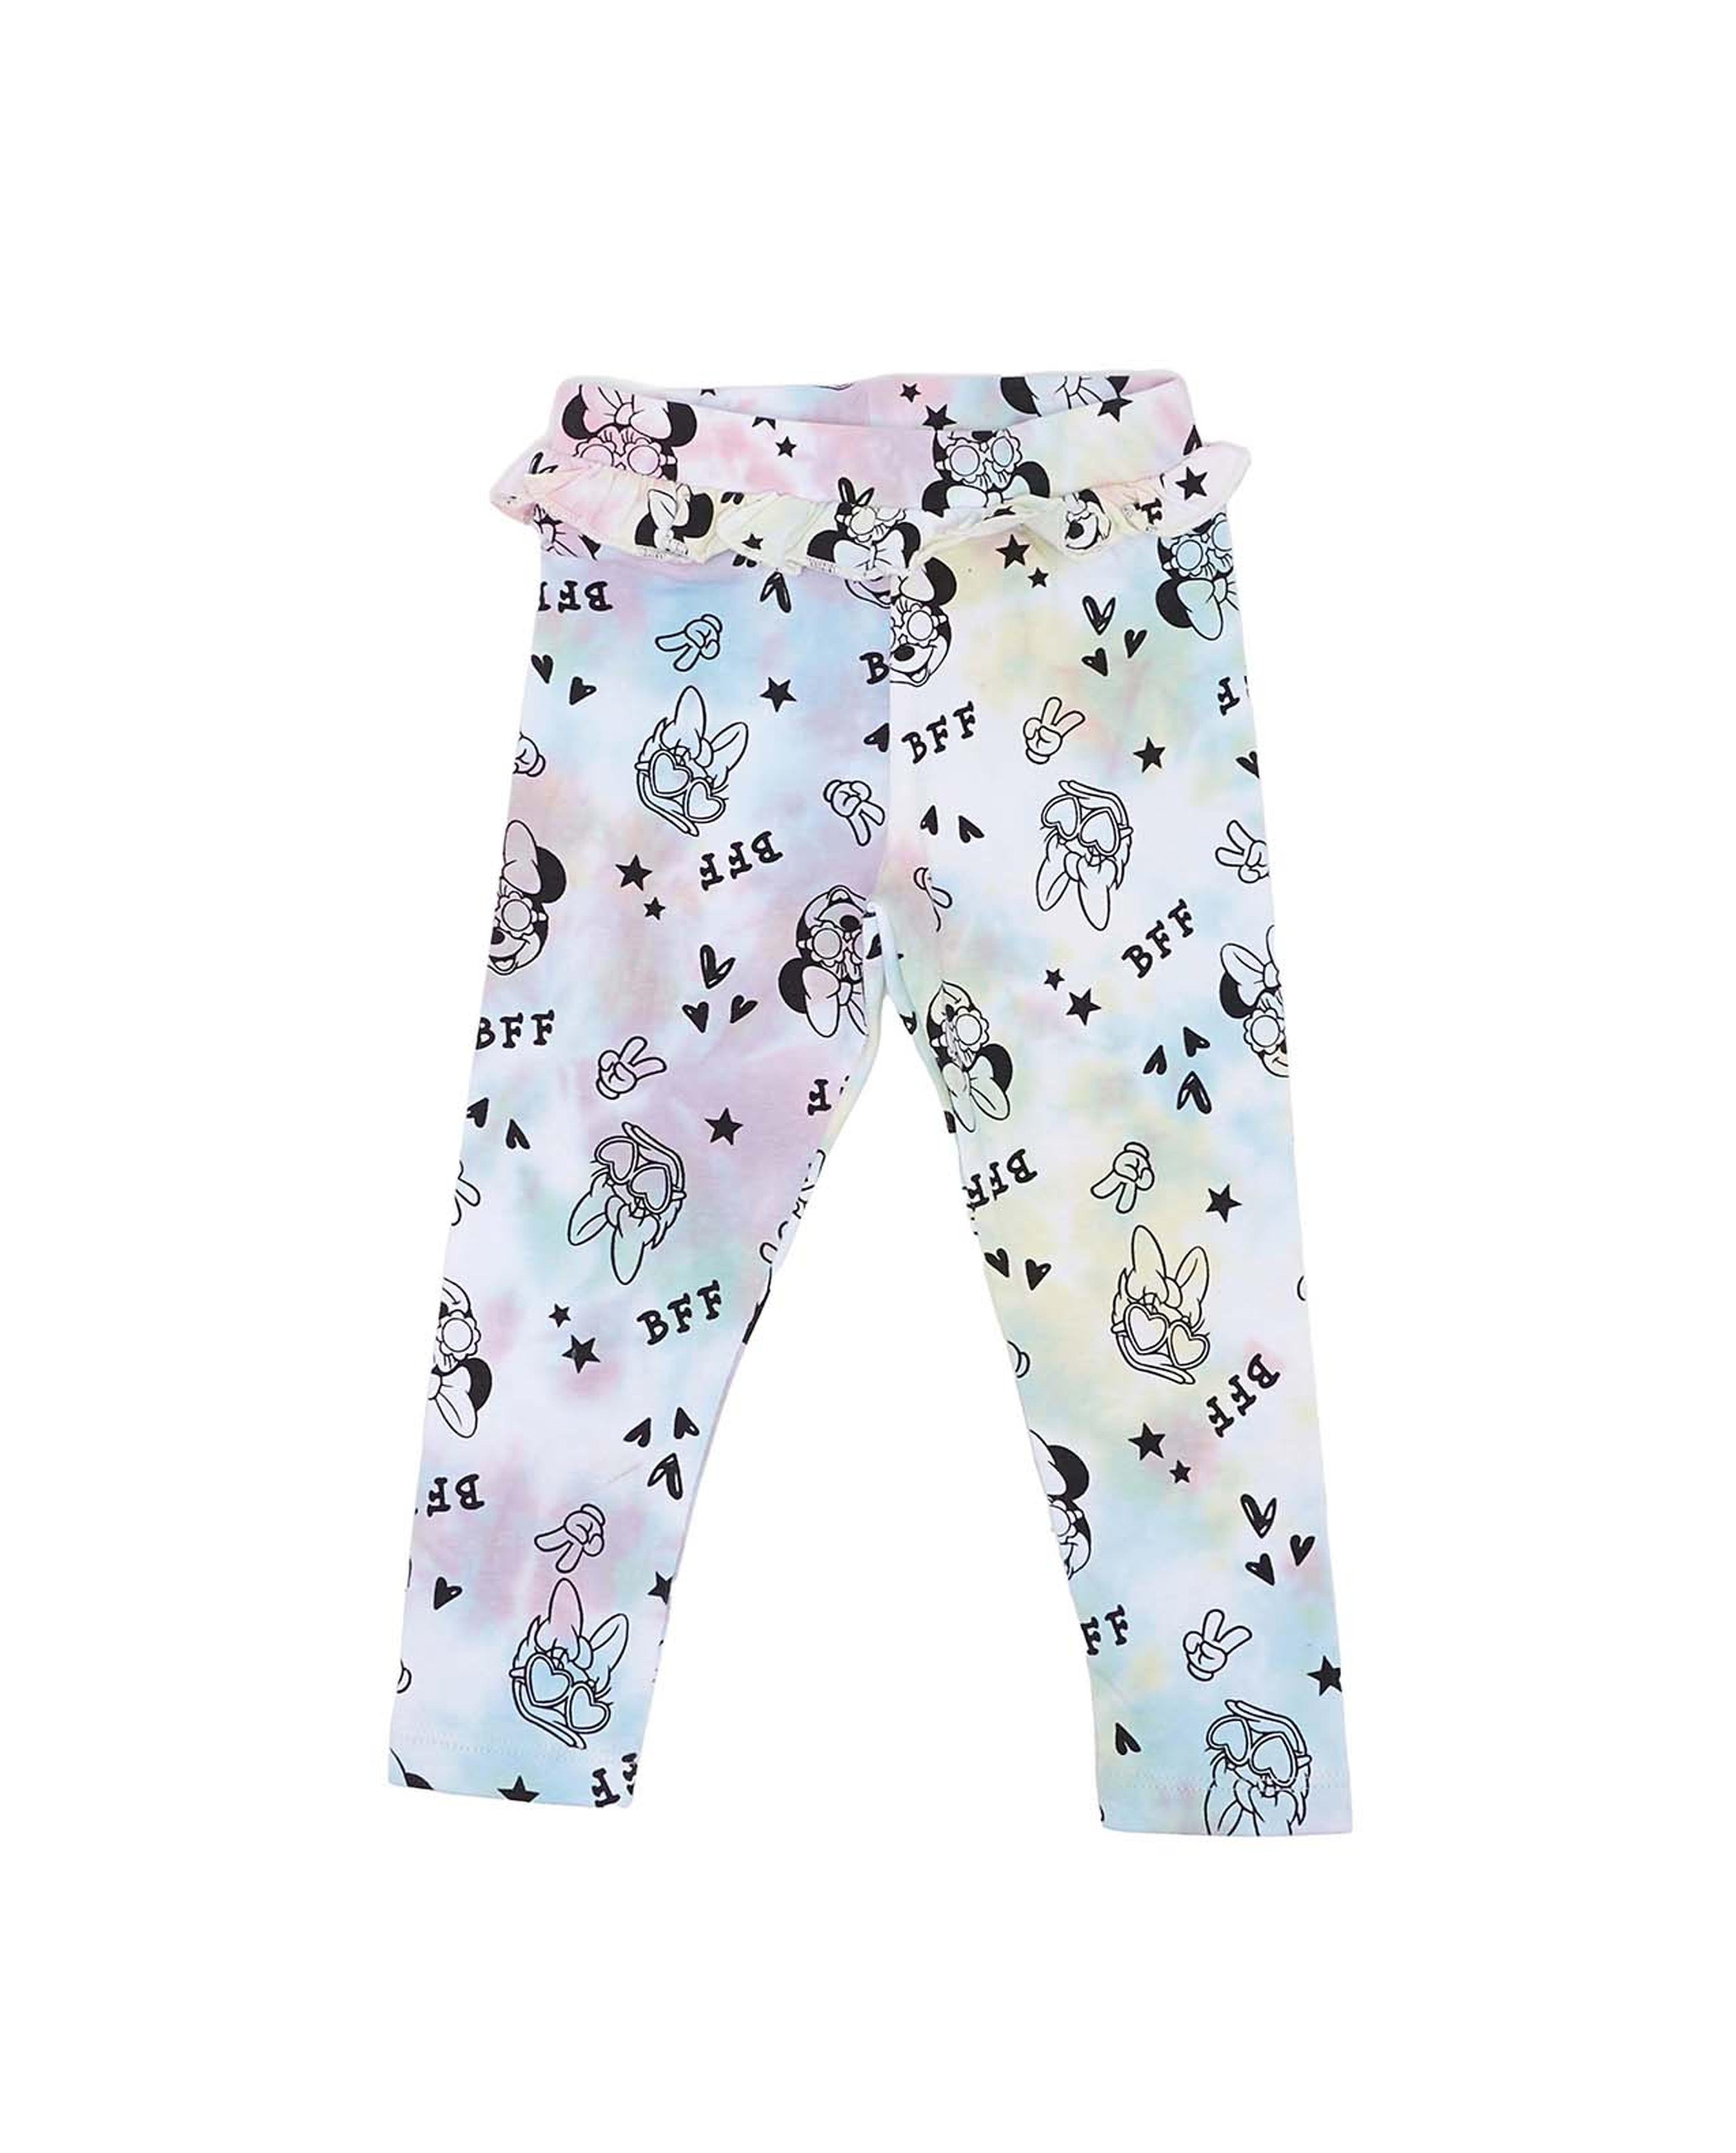 Minnie Mouse & Friends Printed Leggings